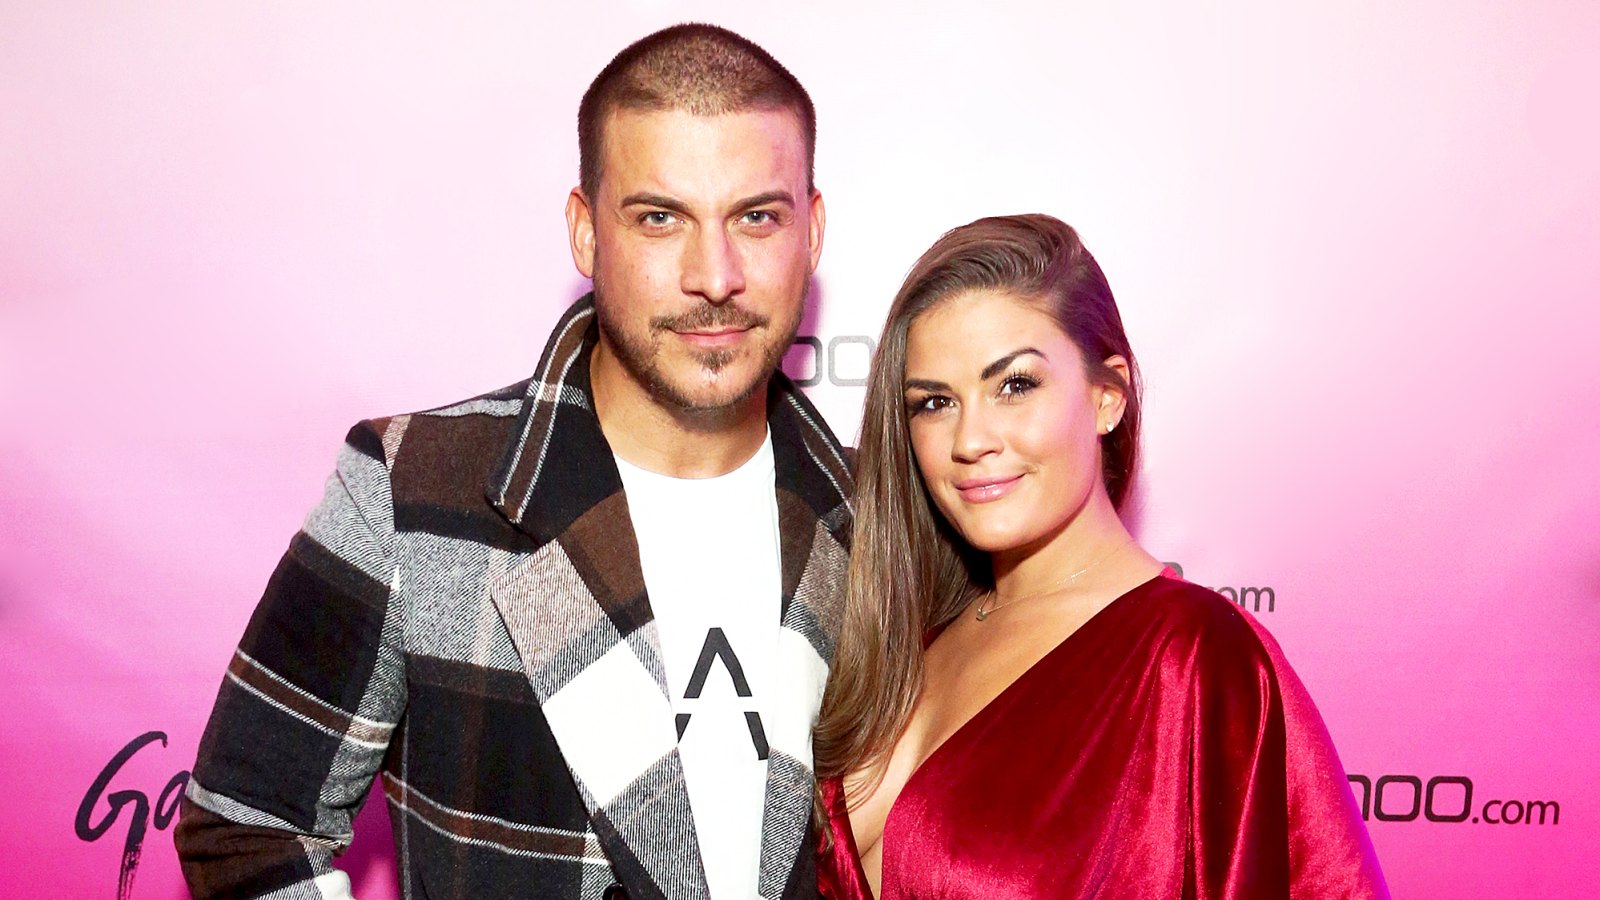 Jax Taylor and Brittany Cartwright at the boohoo.com LA Pop-up Store Launch Party with Galore Magazine on November 1, 2017 in Los Angeles, California.